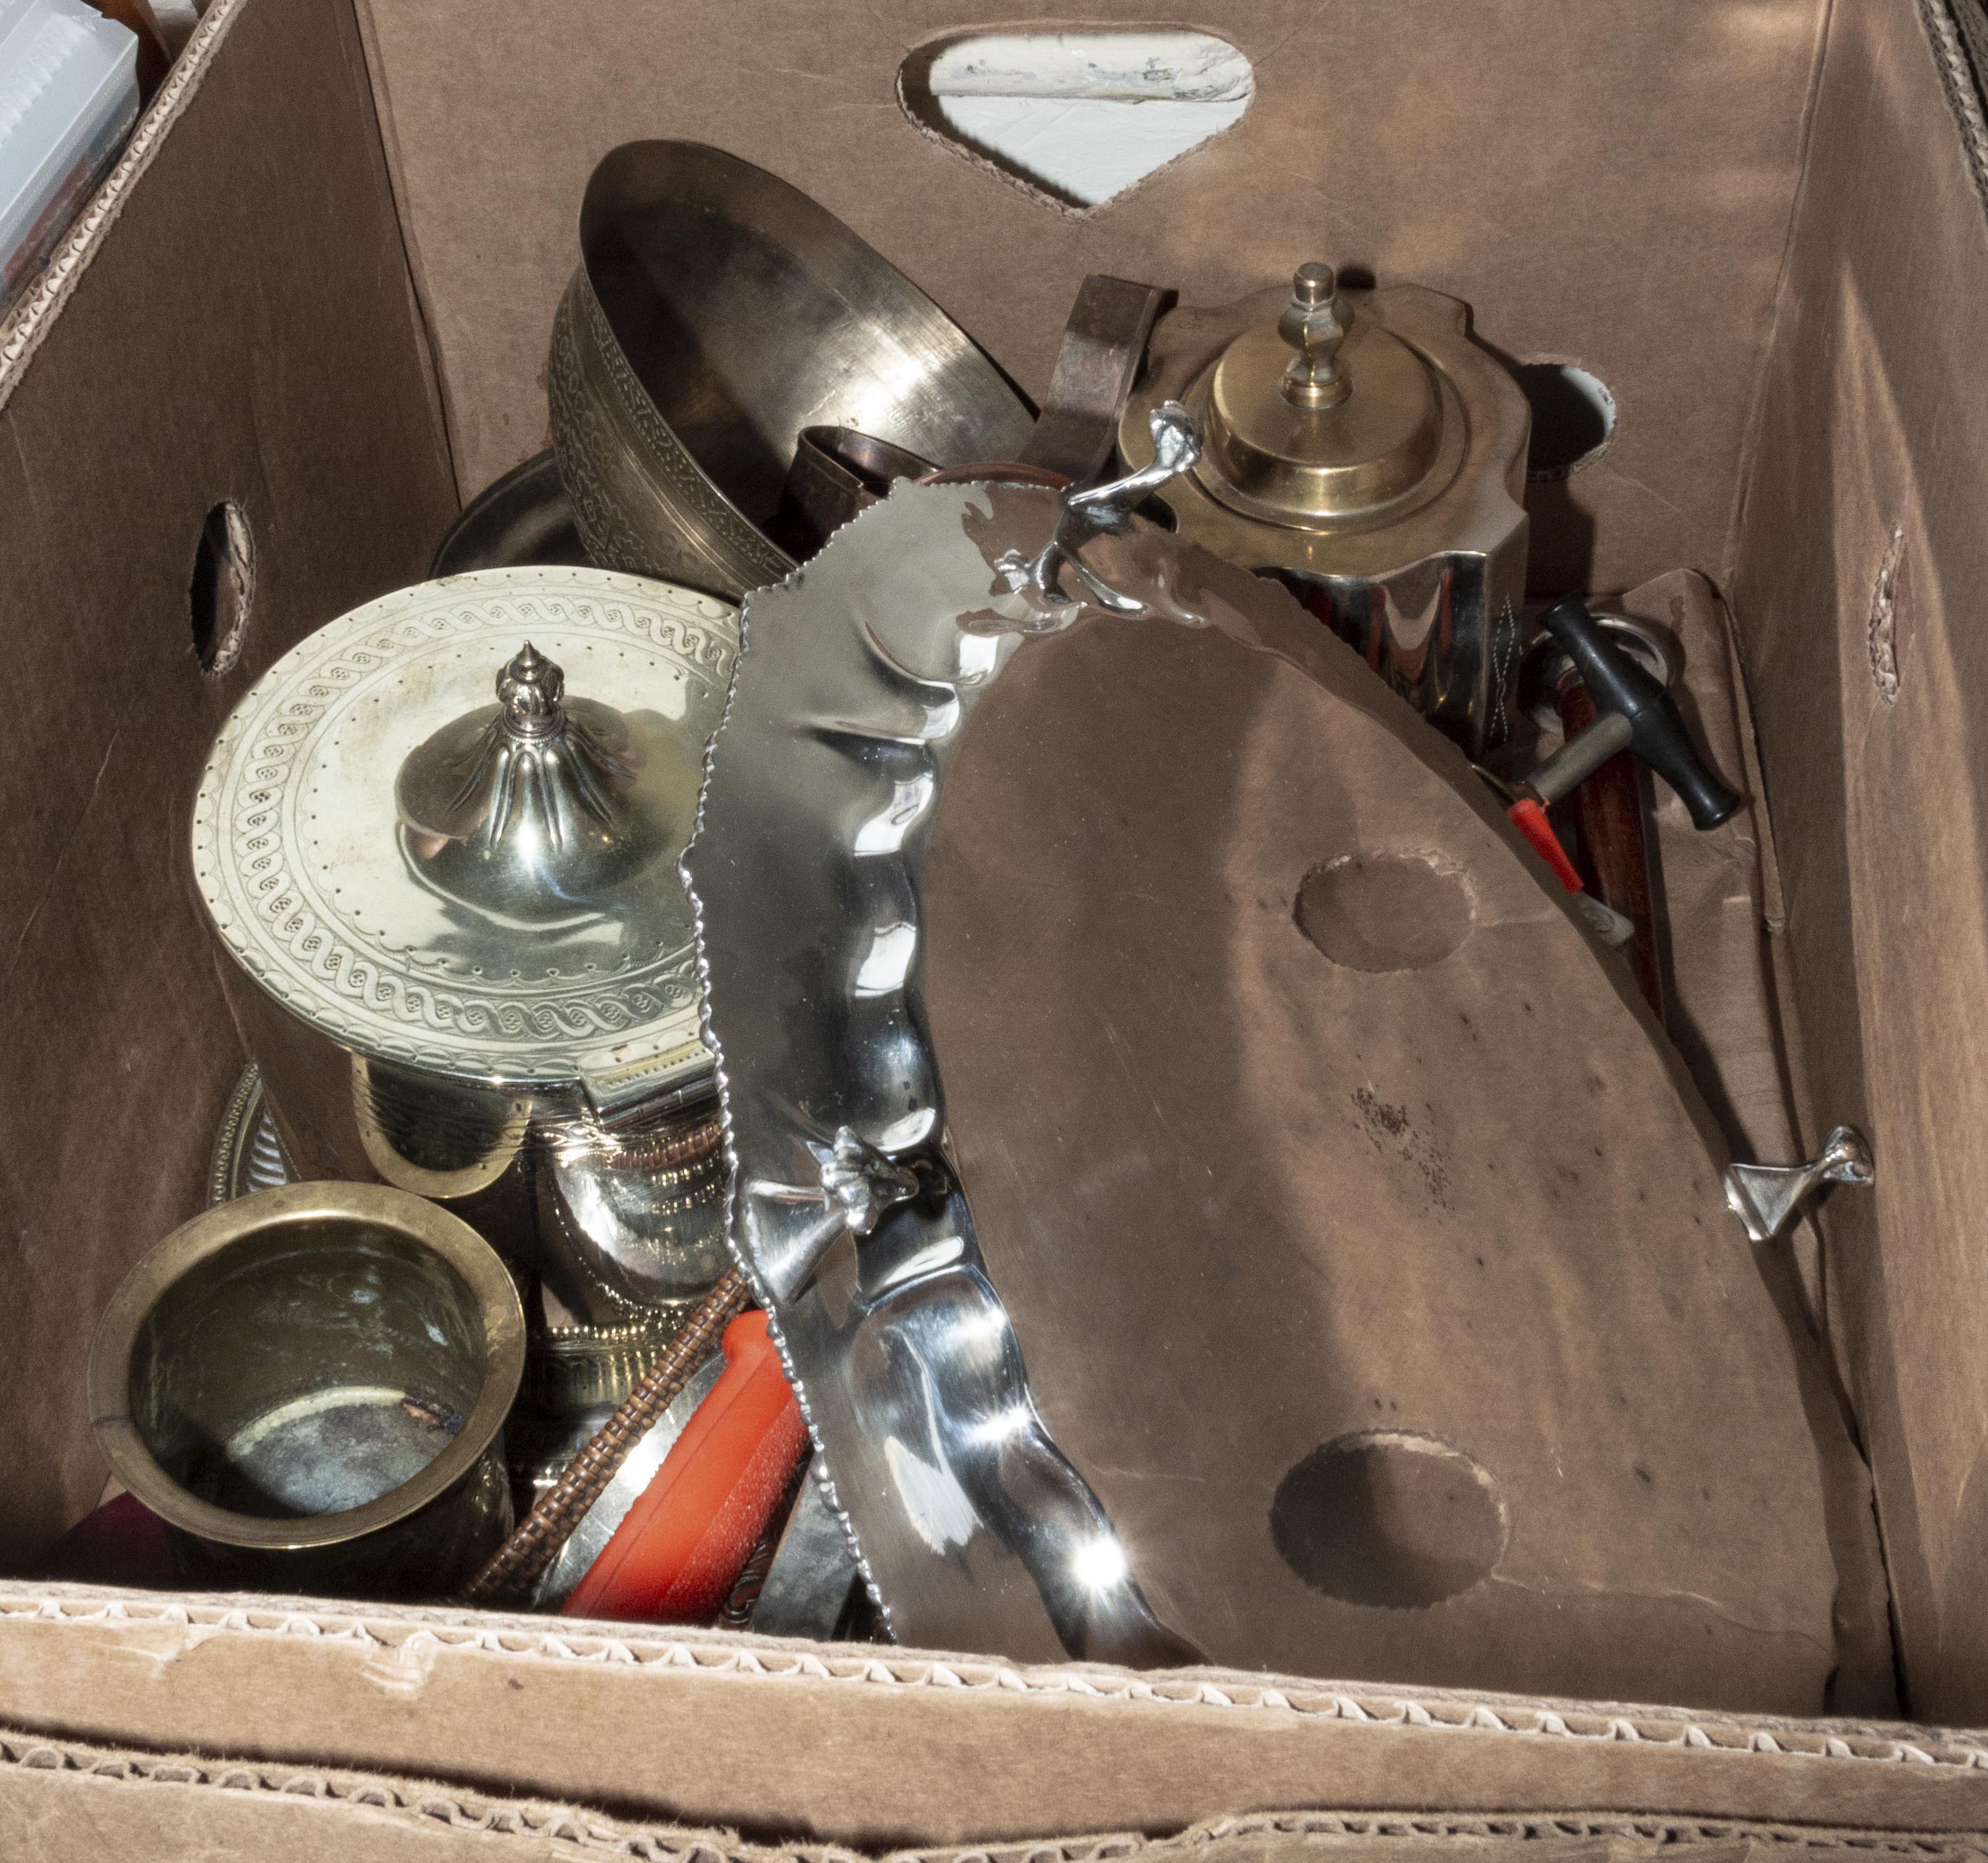 A box containing metal ware